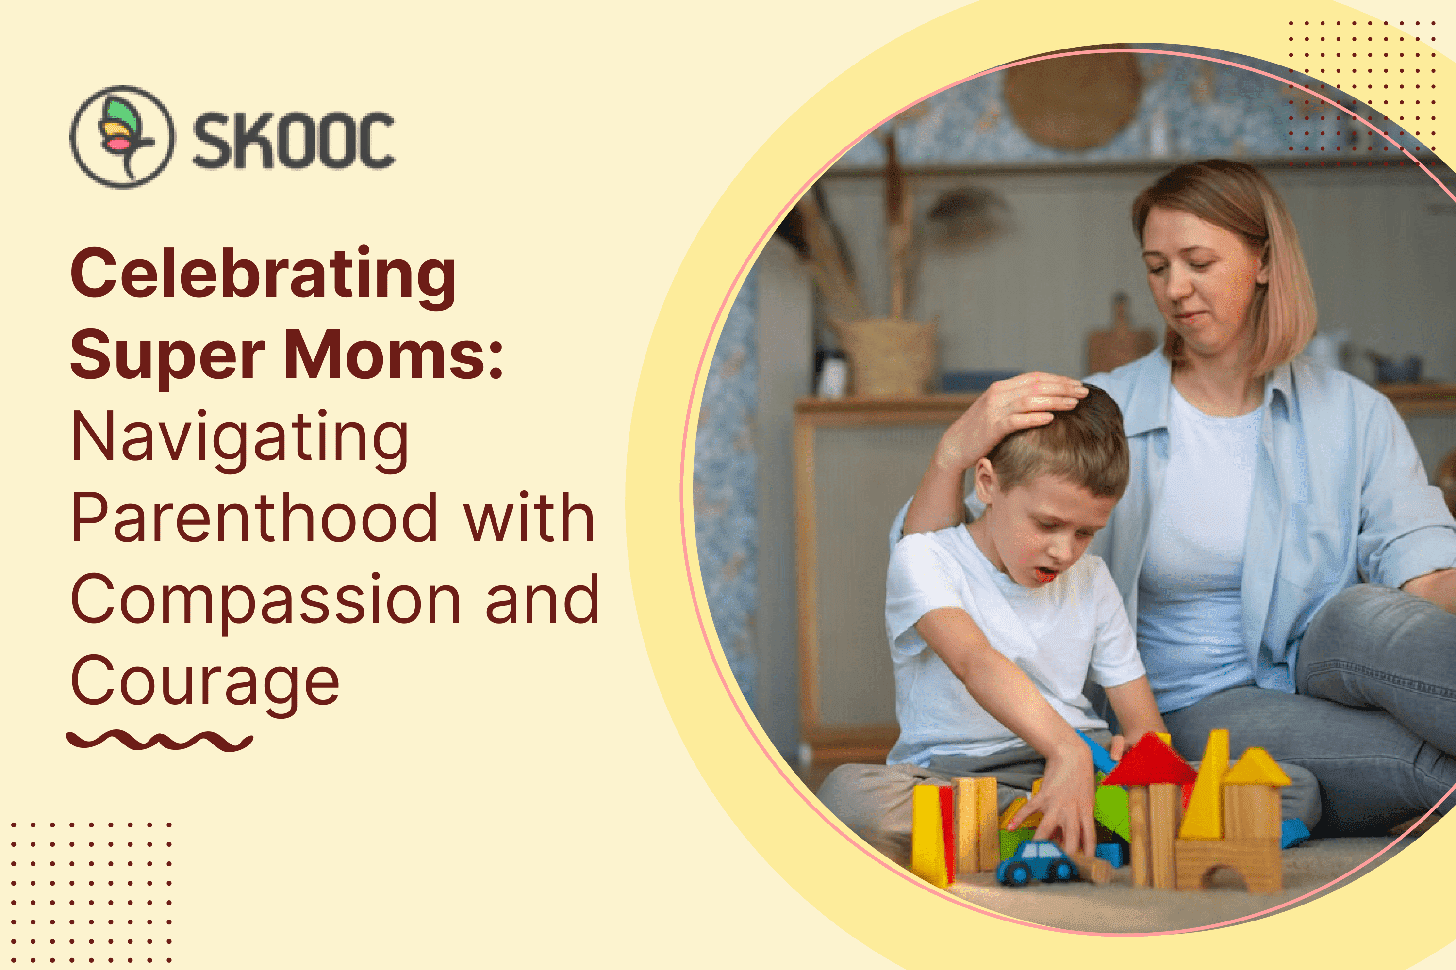 Celebrating Super Moms: Navigating Parenthood with Compassion and Courage